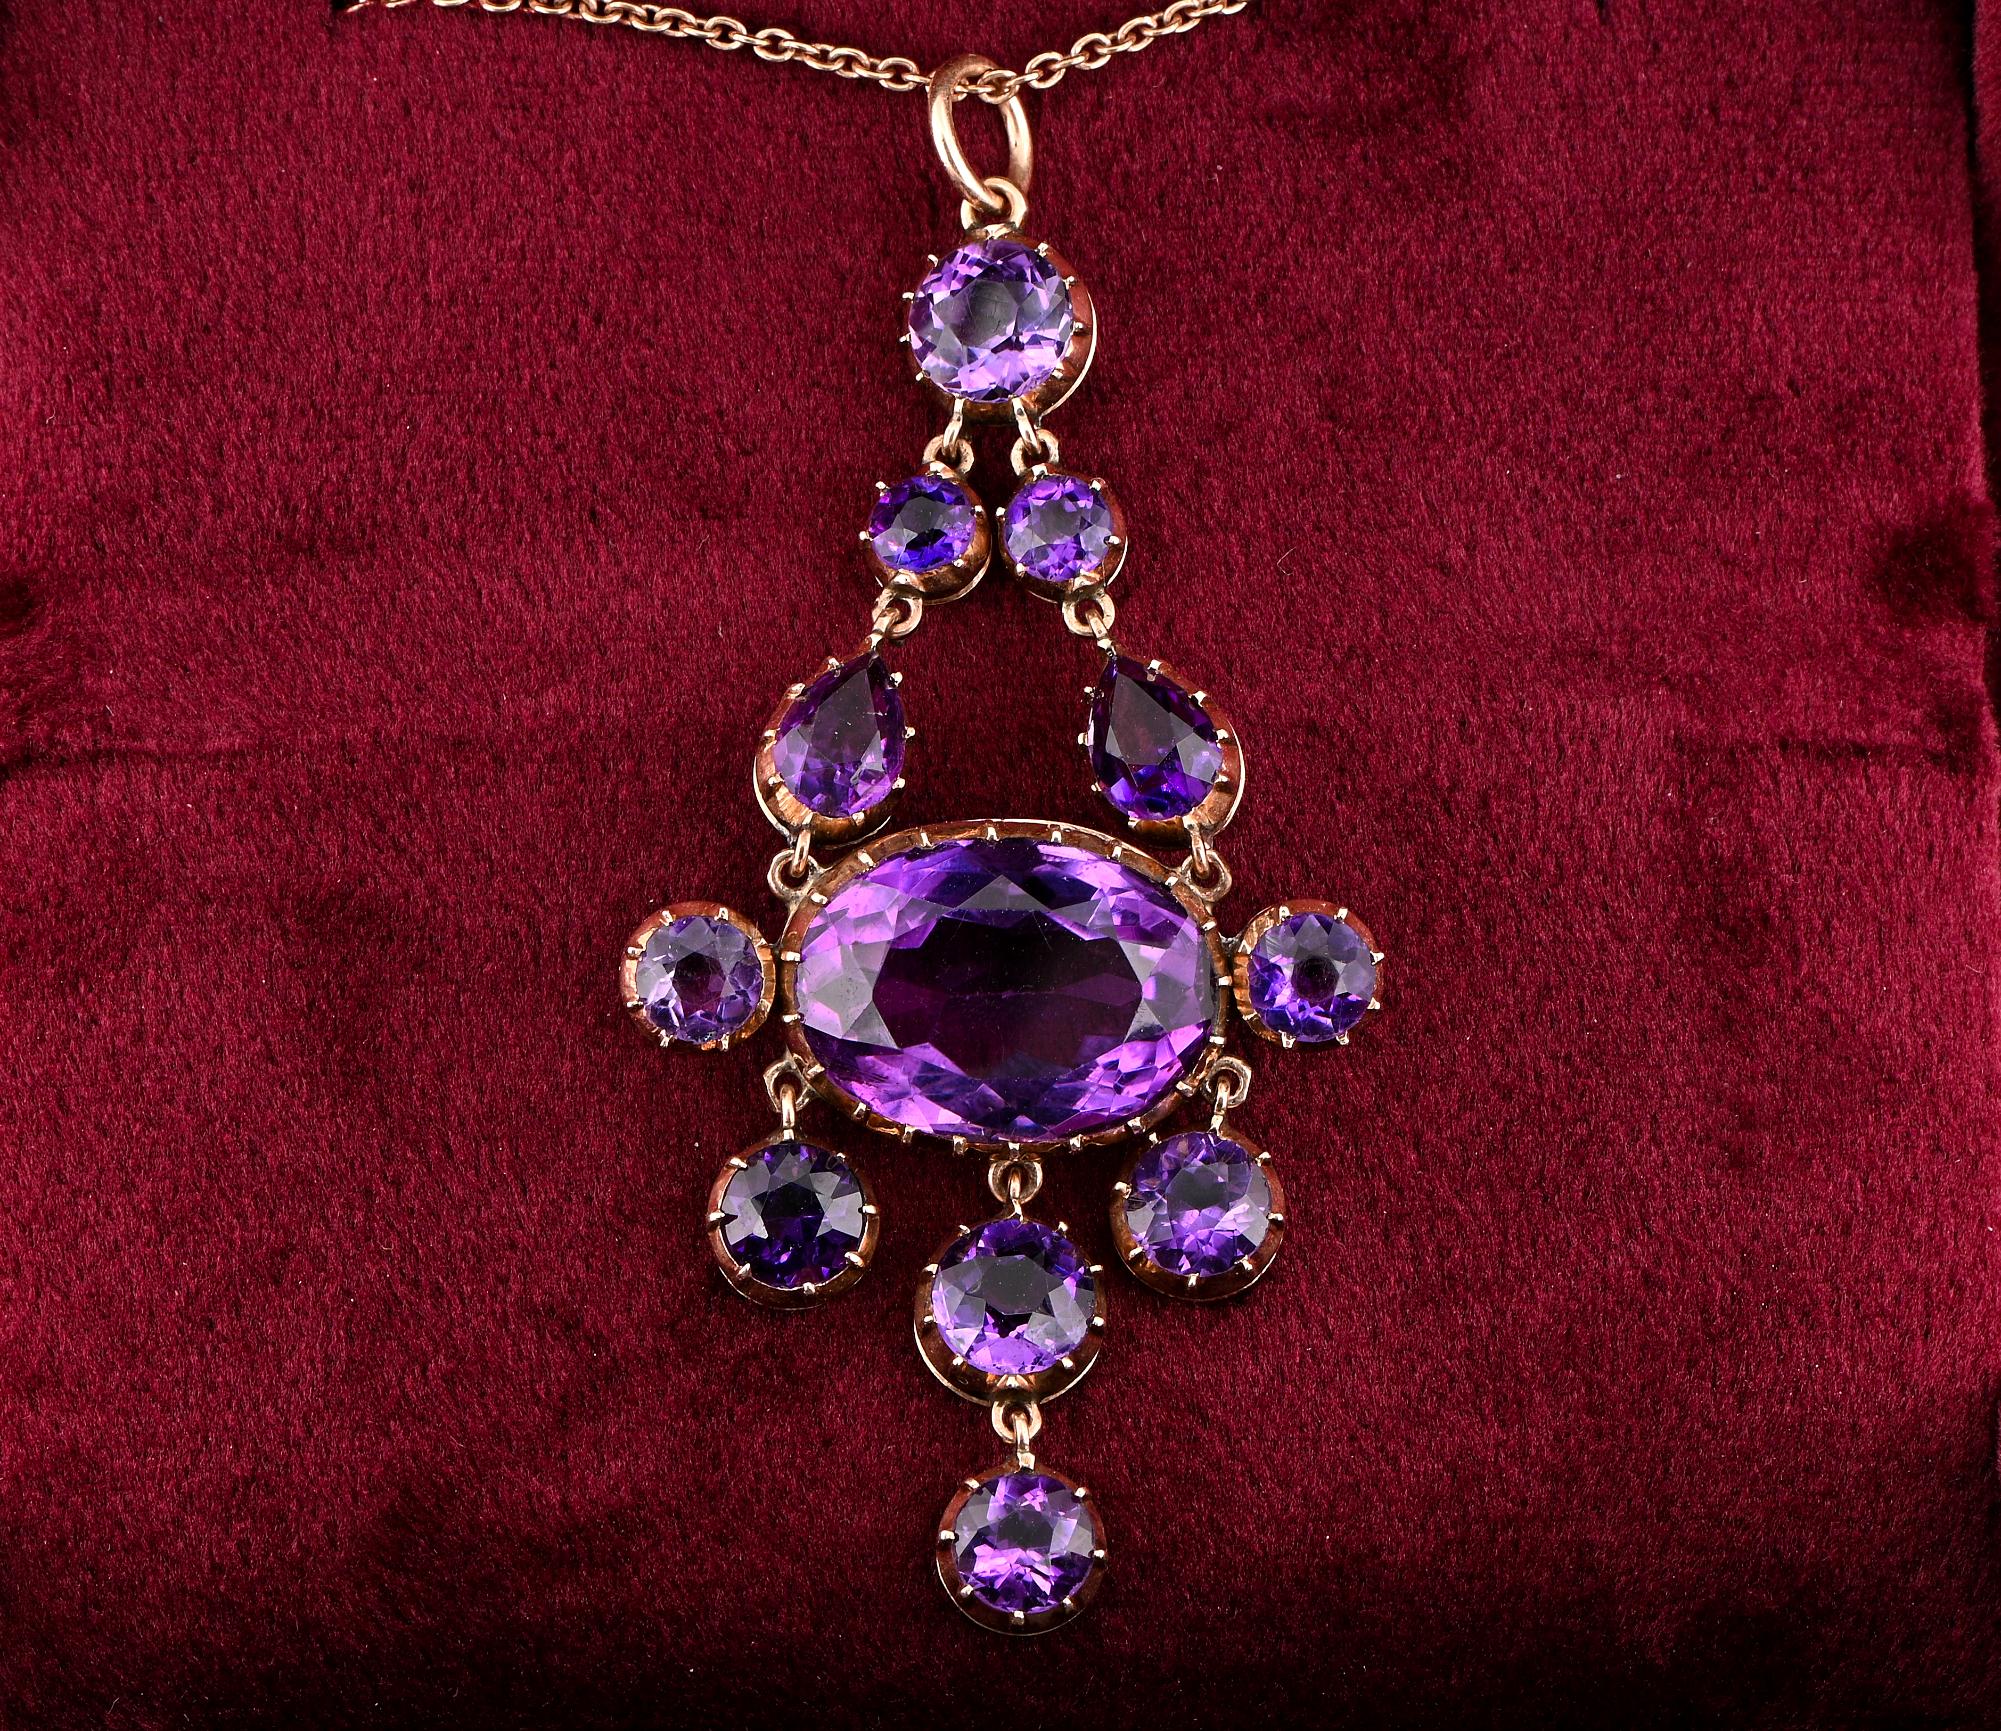 Purple Cascading
This outstanding Victorian pendant is 1890 ca
Superbly hand crafted of solid 9 KT gold- possibly English origin
Tasteful and impressive design given by a combination of natural Amethyst of various cuts, composing this timeless